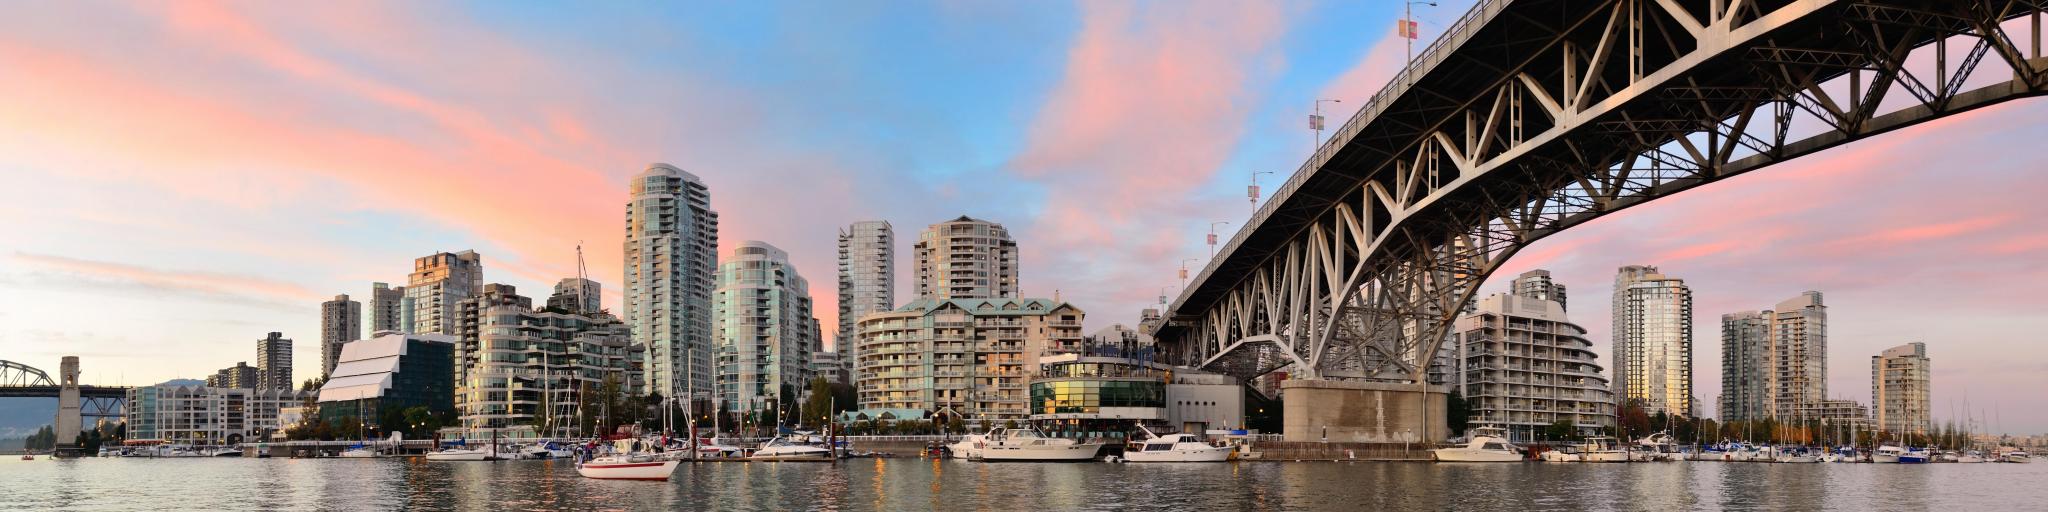 Vancouver False Creek panorama at sunset with bridge and boat. The photo is taken on a rather clear day and shows Vancouver's silhouette.